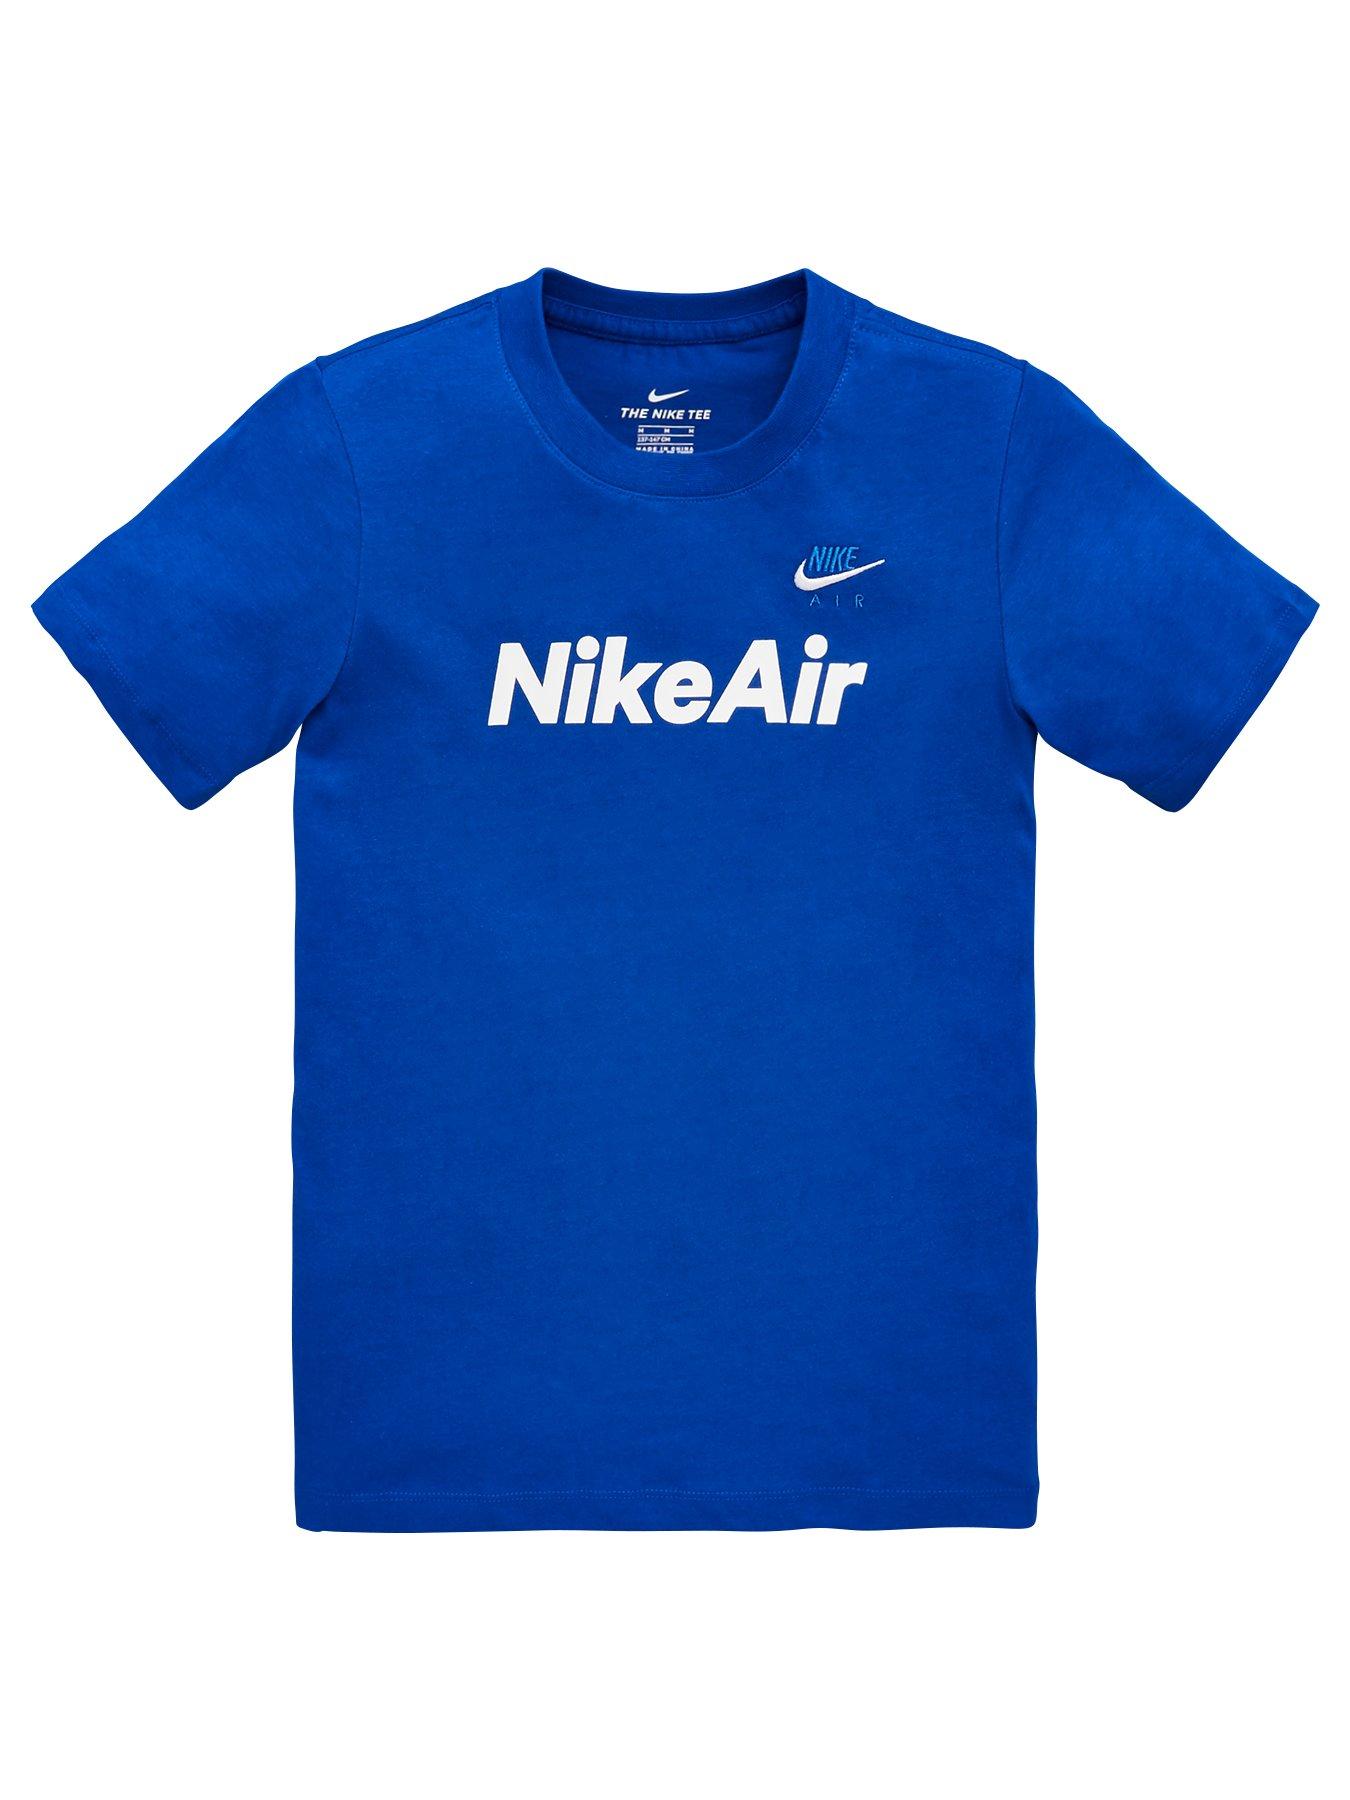 Boys New Adidas Originals Blue T Shirt Tee Summer Kids Trefoil Sizes 7 14 Years - adidas pictures t shirts roblox boy